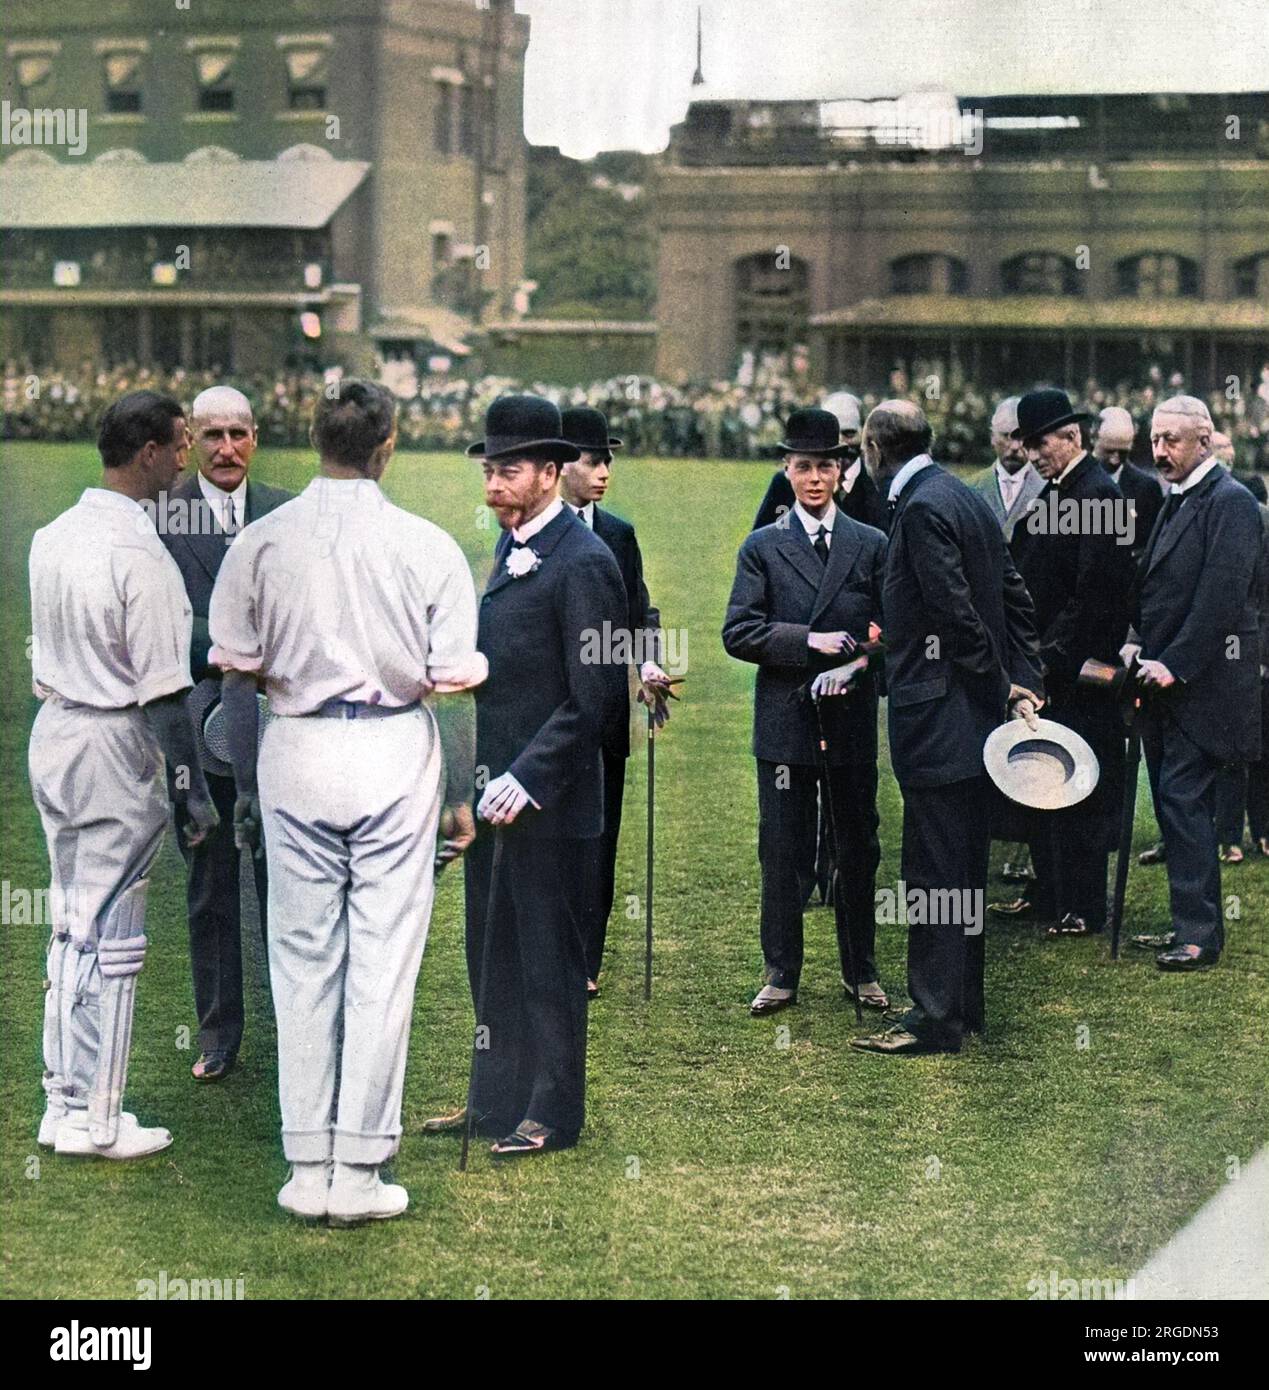 King George V and Edward, Prince of Wales (later King Edward VIII and then Duke of Windsor), pictured at Lord's cricket ground where its centenary was being celebrated in June 1914.  The occasion was marked by a match between M.C.C. South African heroes and the Rest of England.  The King is pictured chatting to Mr C. B. Fry, Mr Johnny Douglas and Lord Hawke.  Prince Albert (later King George VI) is seen just behind the King, and the Prince of Wales is talking to Mr F. E. Lacey.  On the right are Sir C. Cust and the Duke of Devonshire. Stock Photo